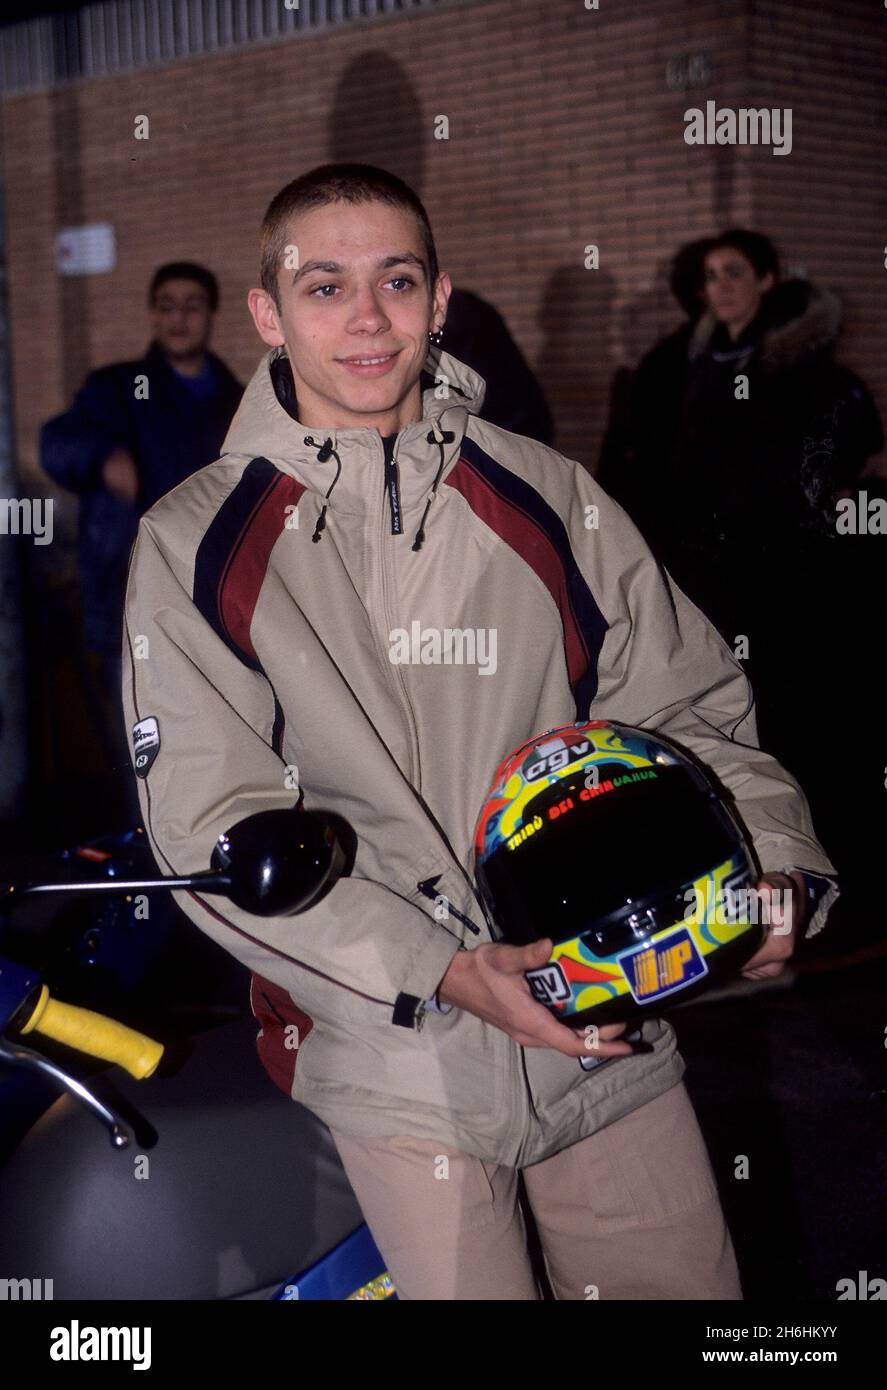 Milan, Italy. 15th Nov, 2000. Milan, 90s archive in the photo: Valentino  Rossi © fotostore Credit: Independent Photo Agency/Alamy Live News Stock  Photo - Alamy